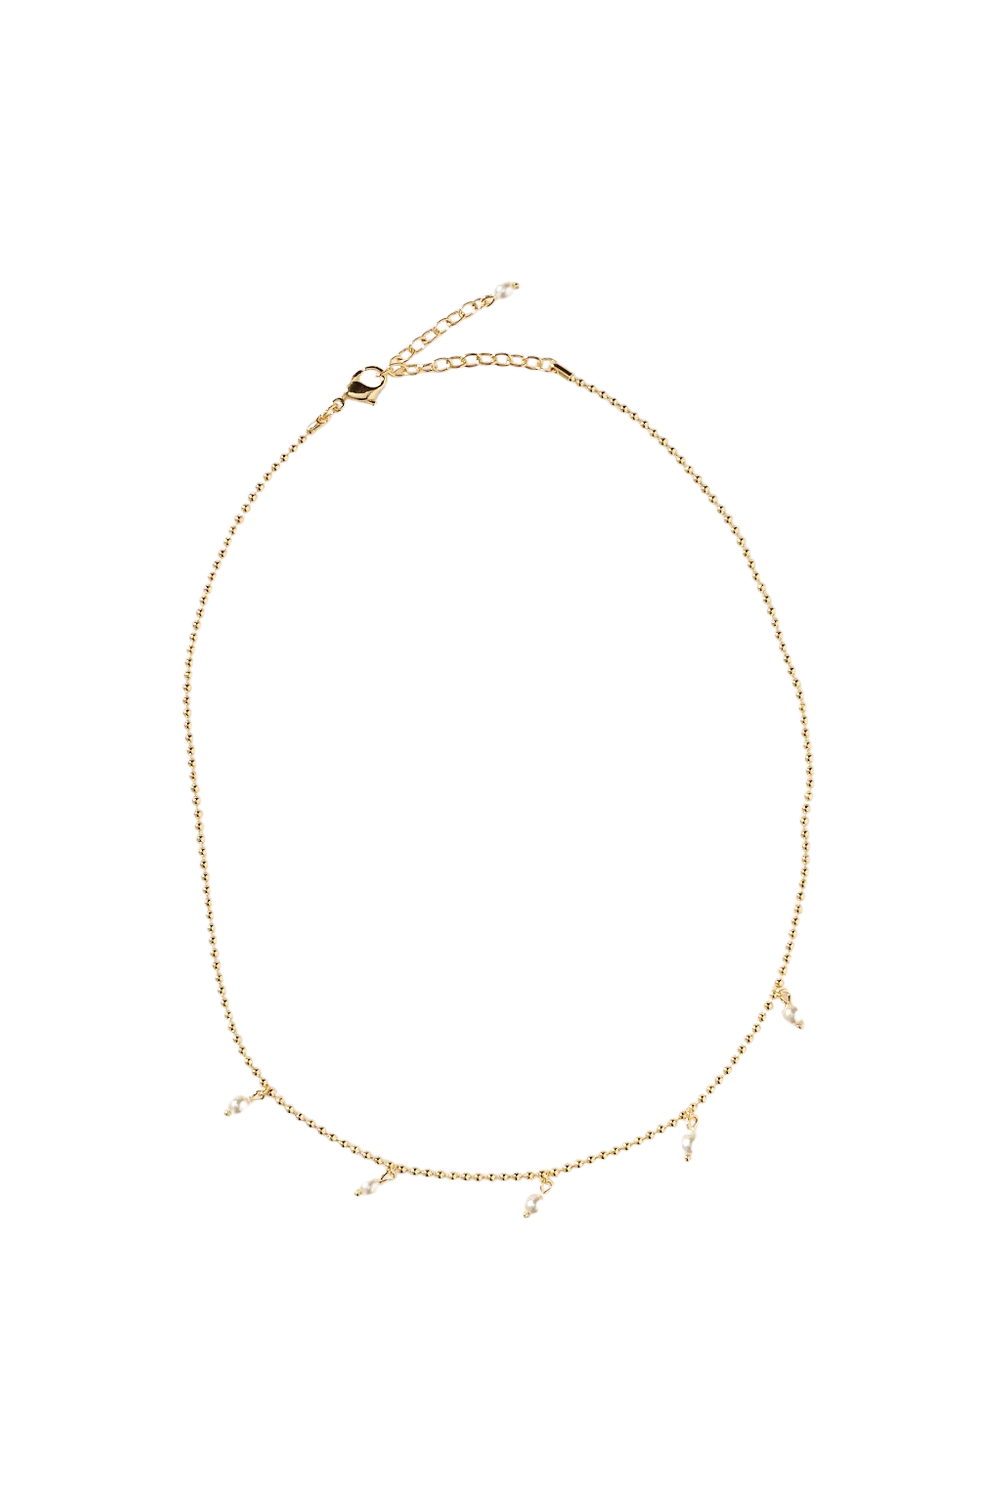 Steph Shaker Necklace - Pearl